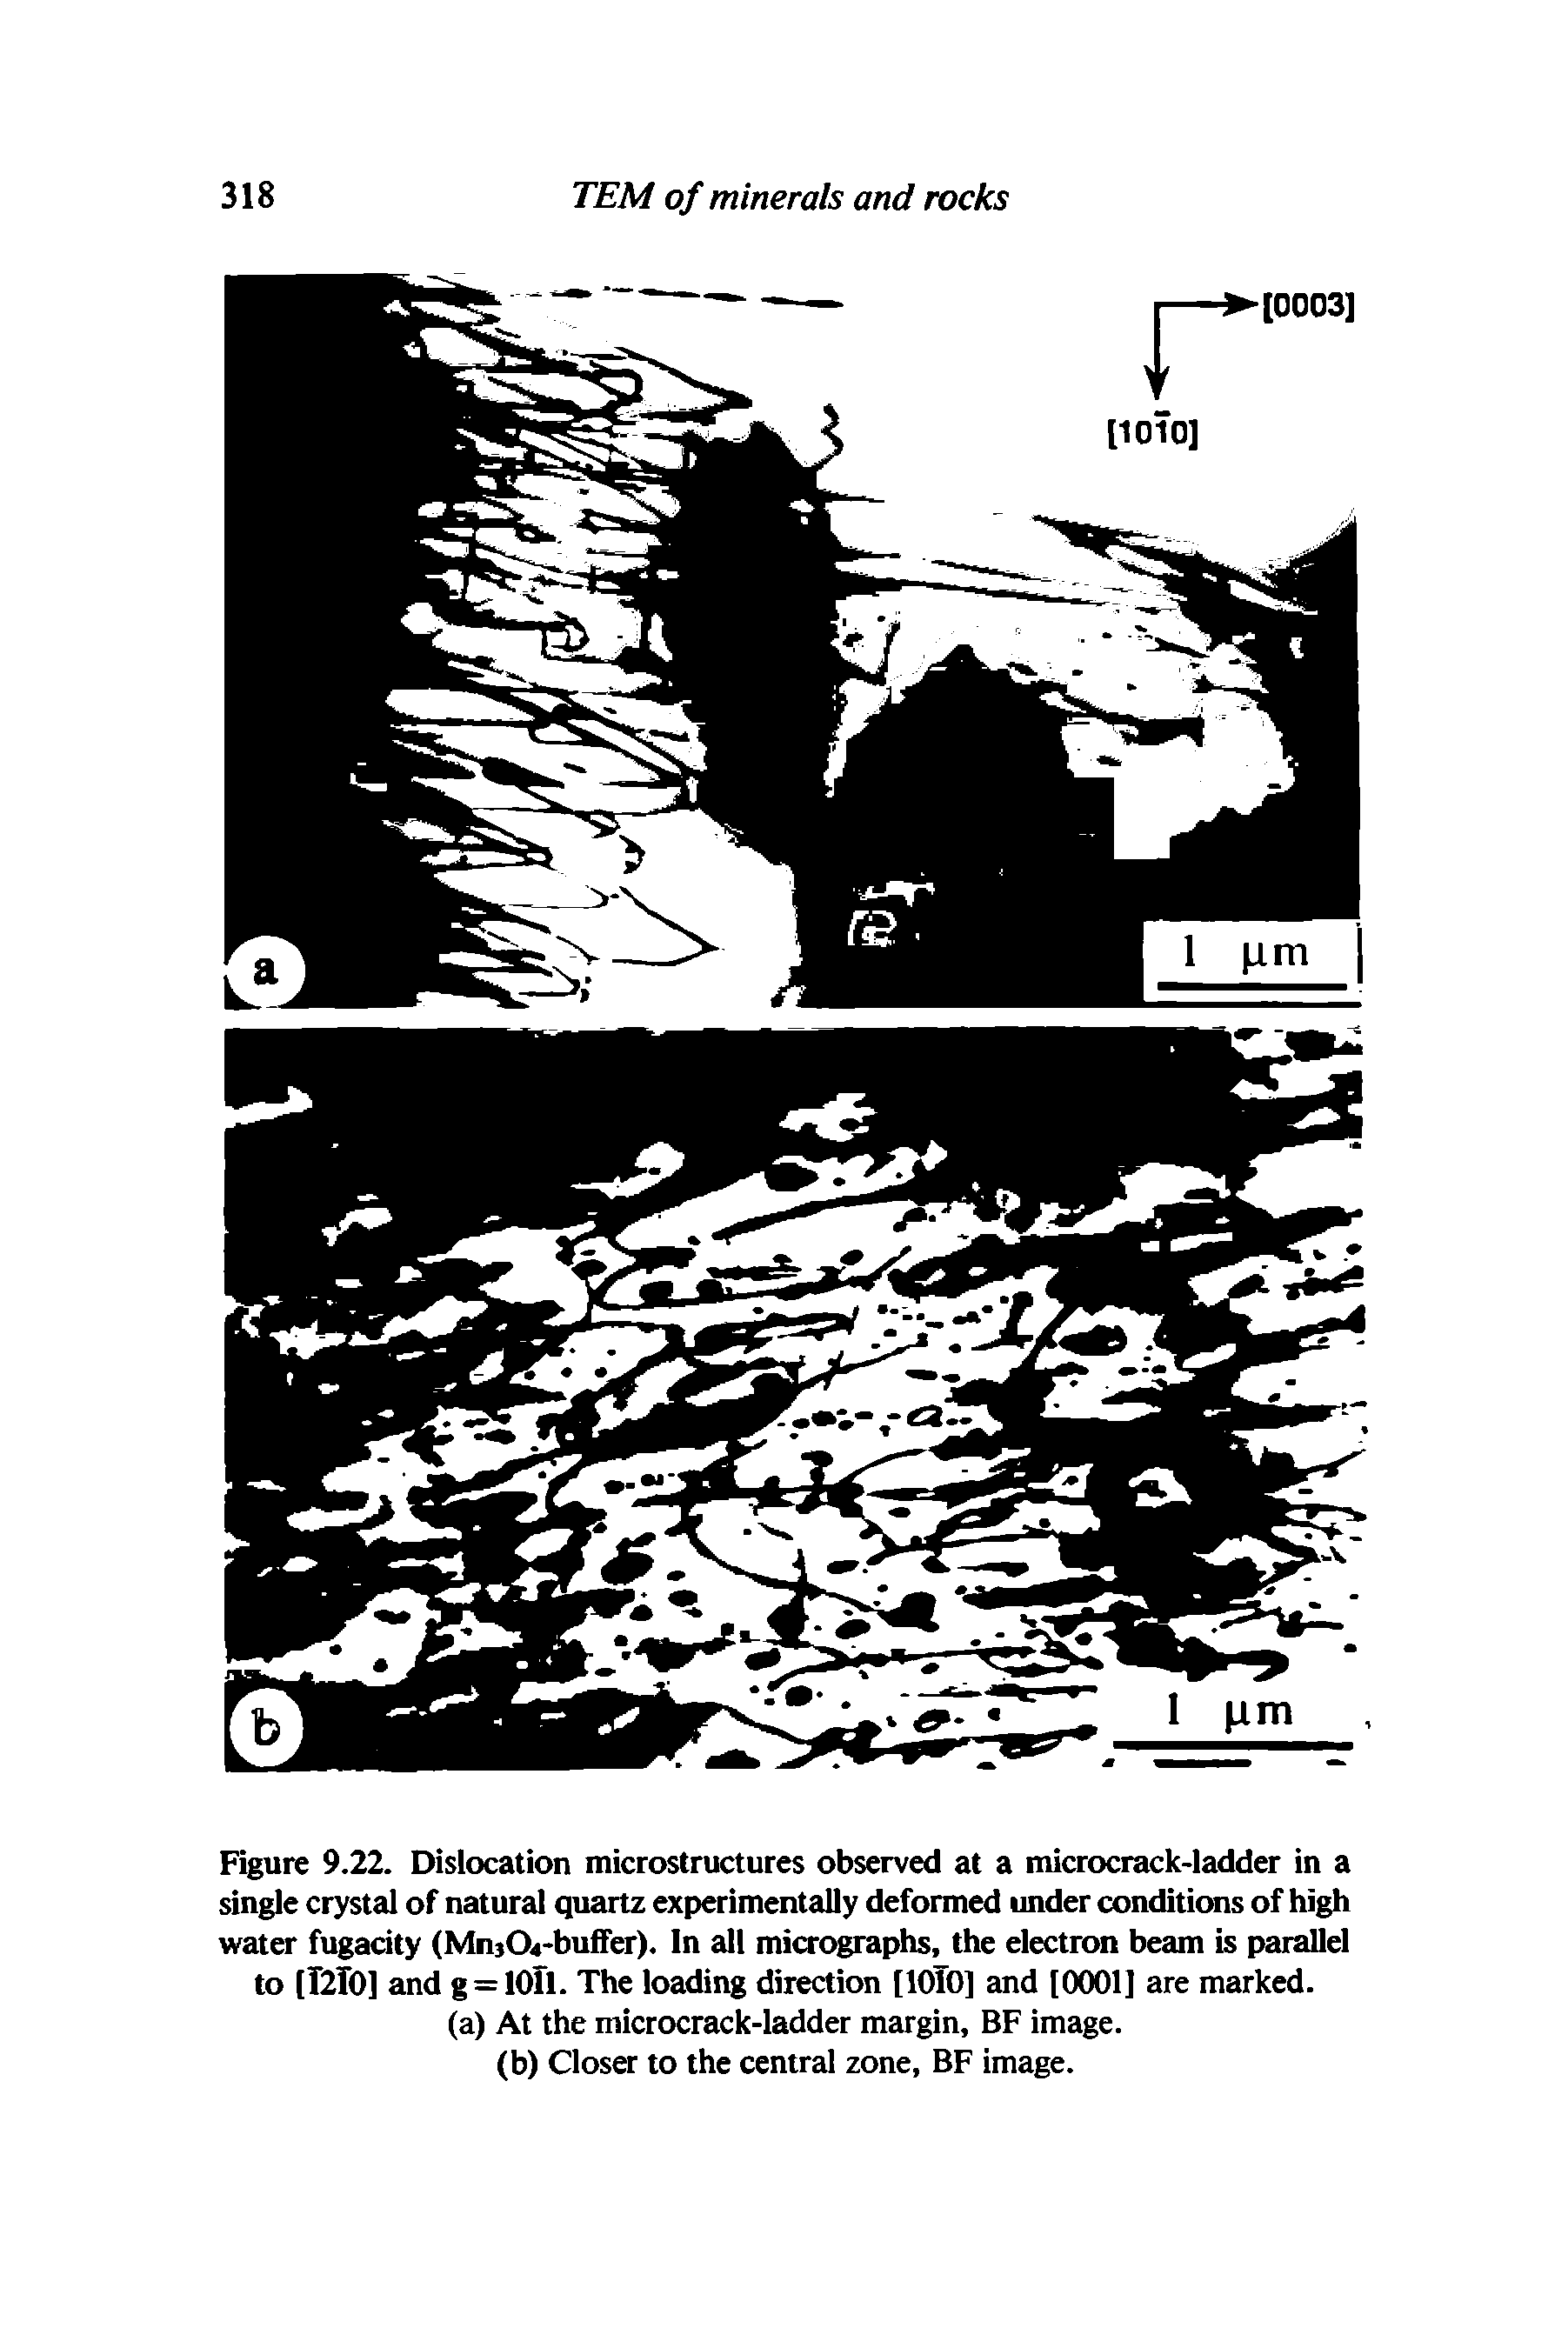 Figure 9.22. Dislocation microstructures observed at a microcrack-ladder in a single crystal of natural quartz experimentally deformed under conditions of high water fugadty (Mn)04 buffer). In all micrographs, the electron beam is parallel to [1210] and g = 10ll. The loading direction [lOTO] and [0001] are marked.